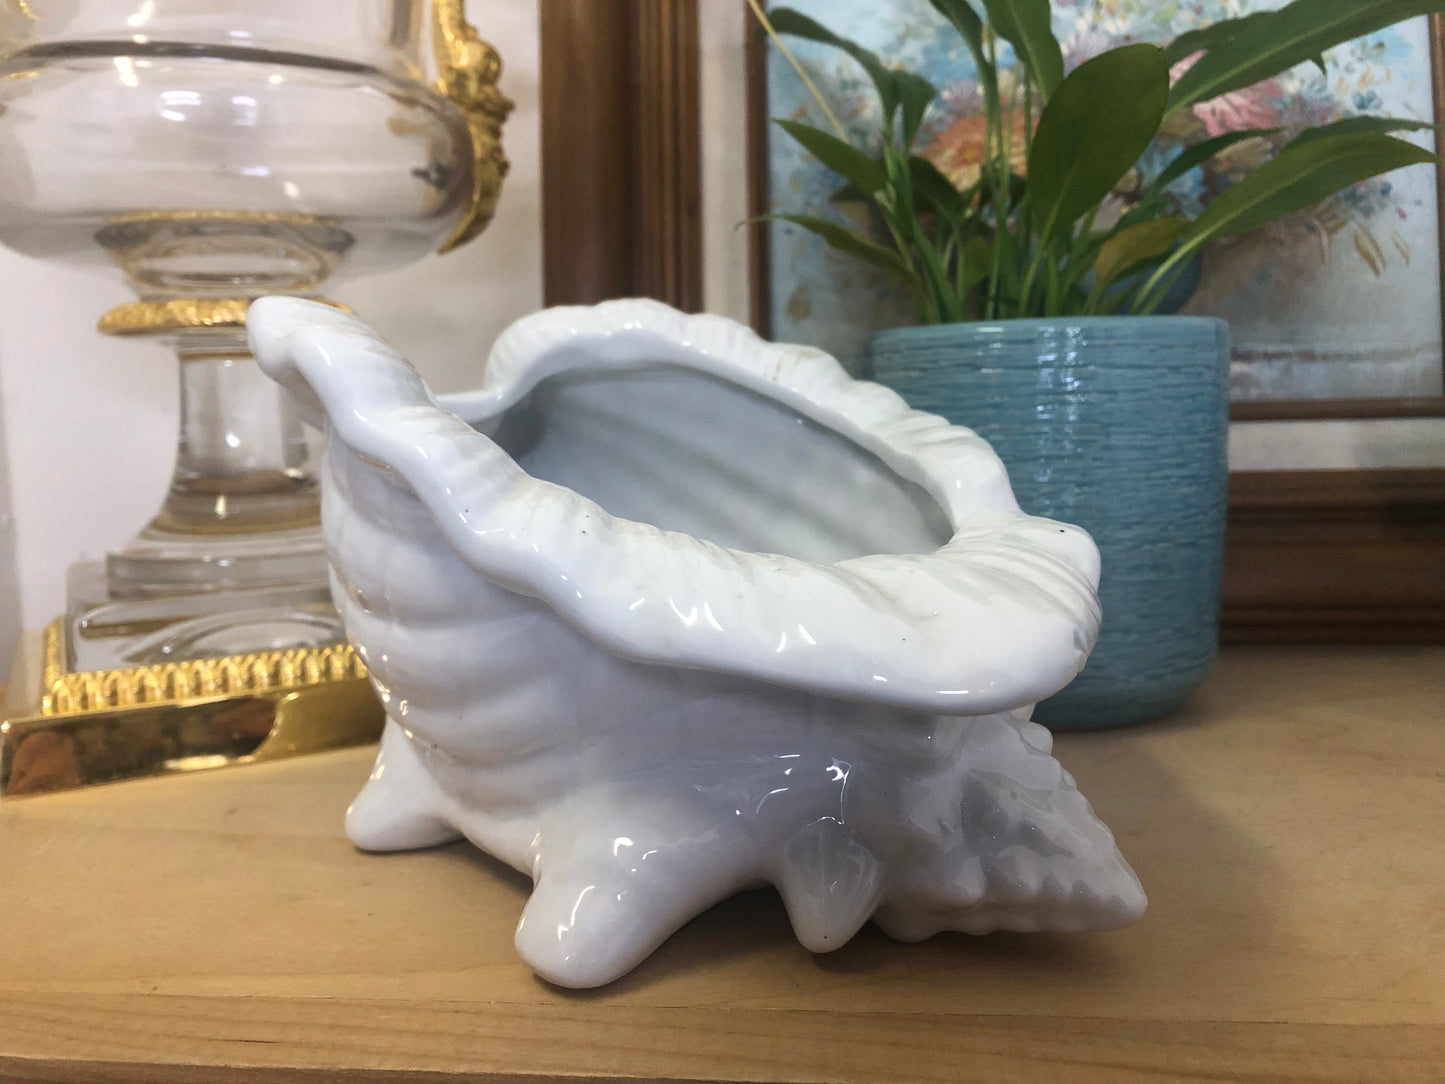 Vintage conch shell planter - Excellent condition!